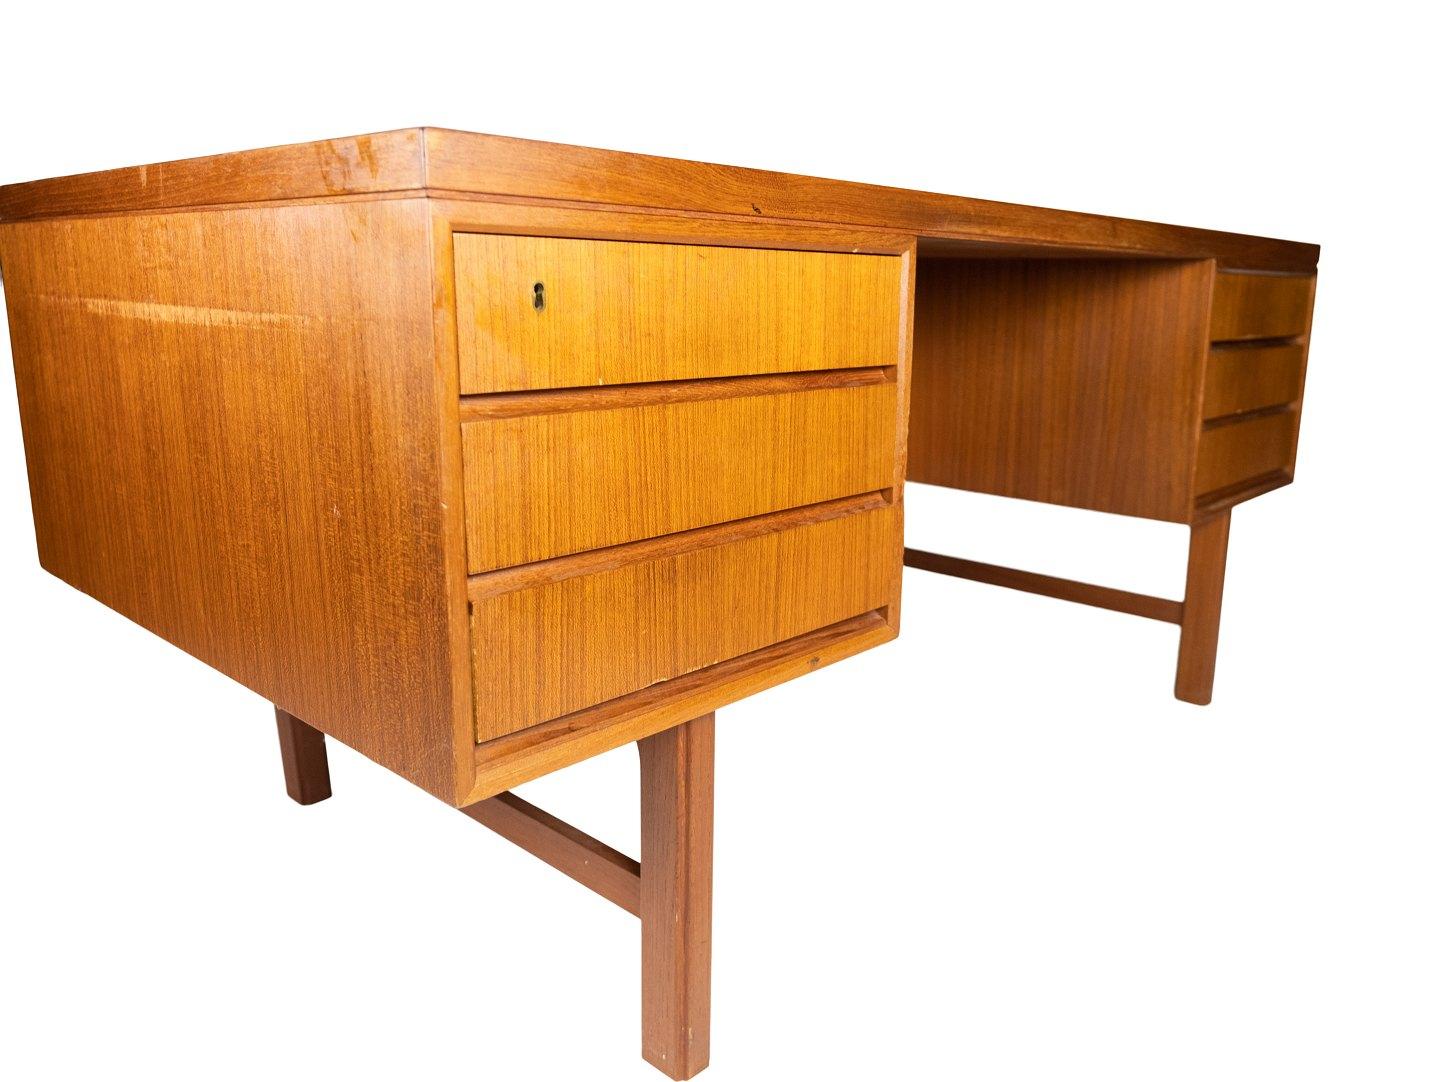 The desk in teak, designed by Omann Junior in the 1960s, is a prominent example of Danish furniture design from that time.

With its characteristic teak wood design, the desk radiates a warm and inviting atmosphere that fits perfectly with the